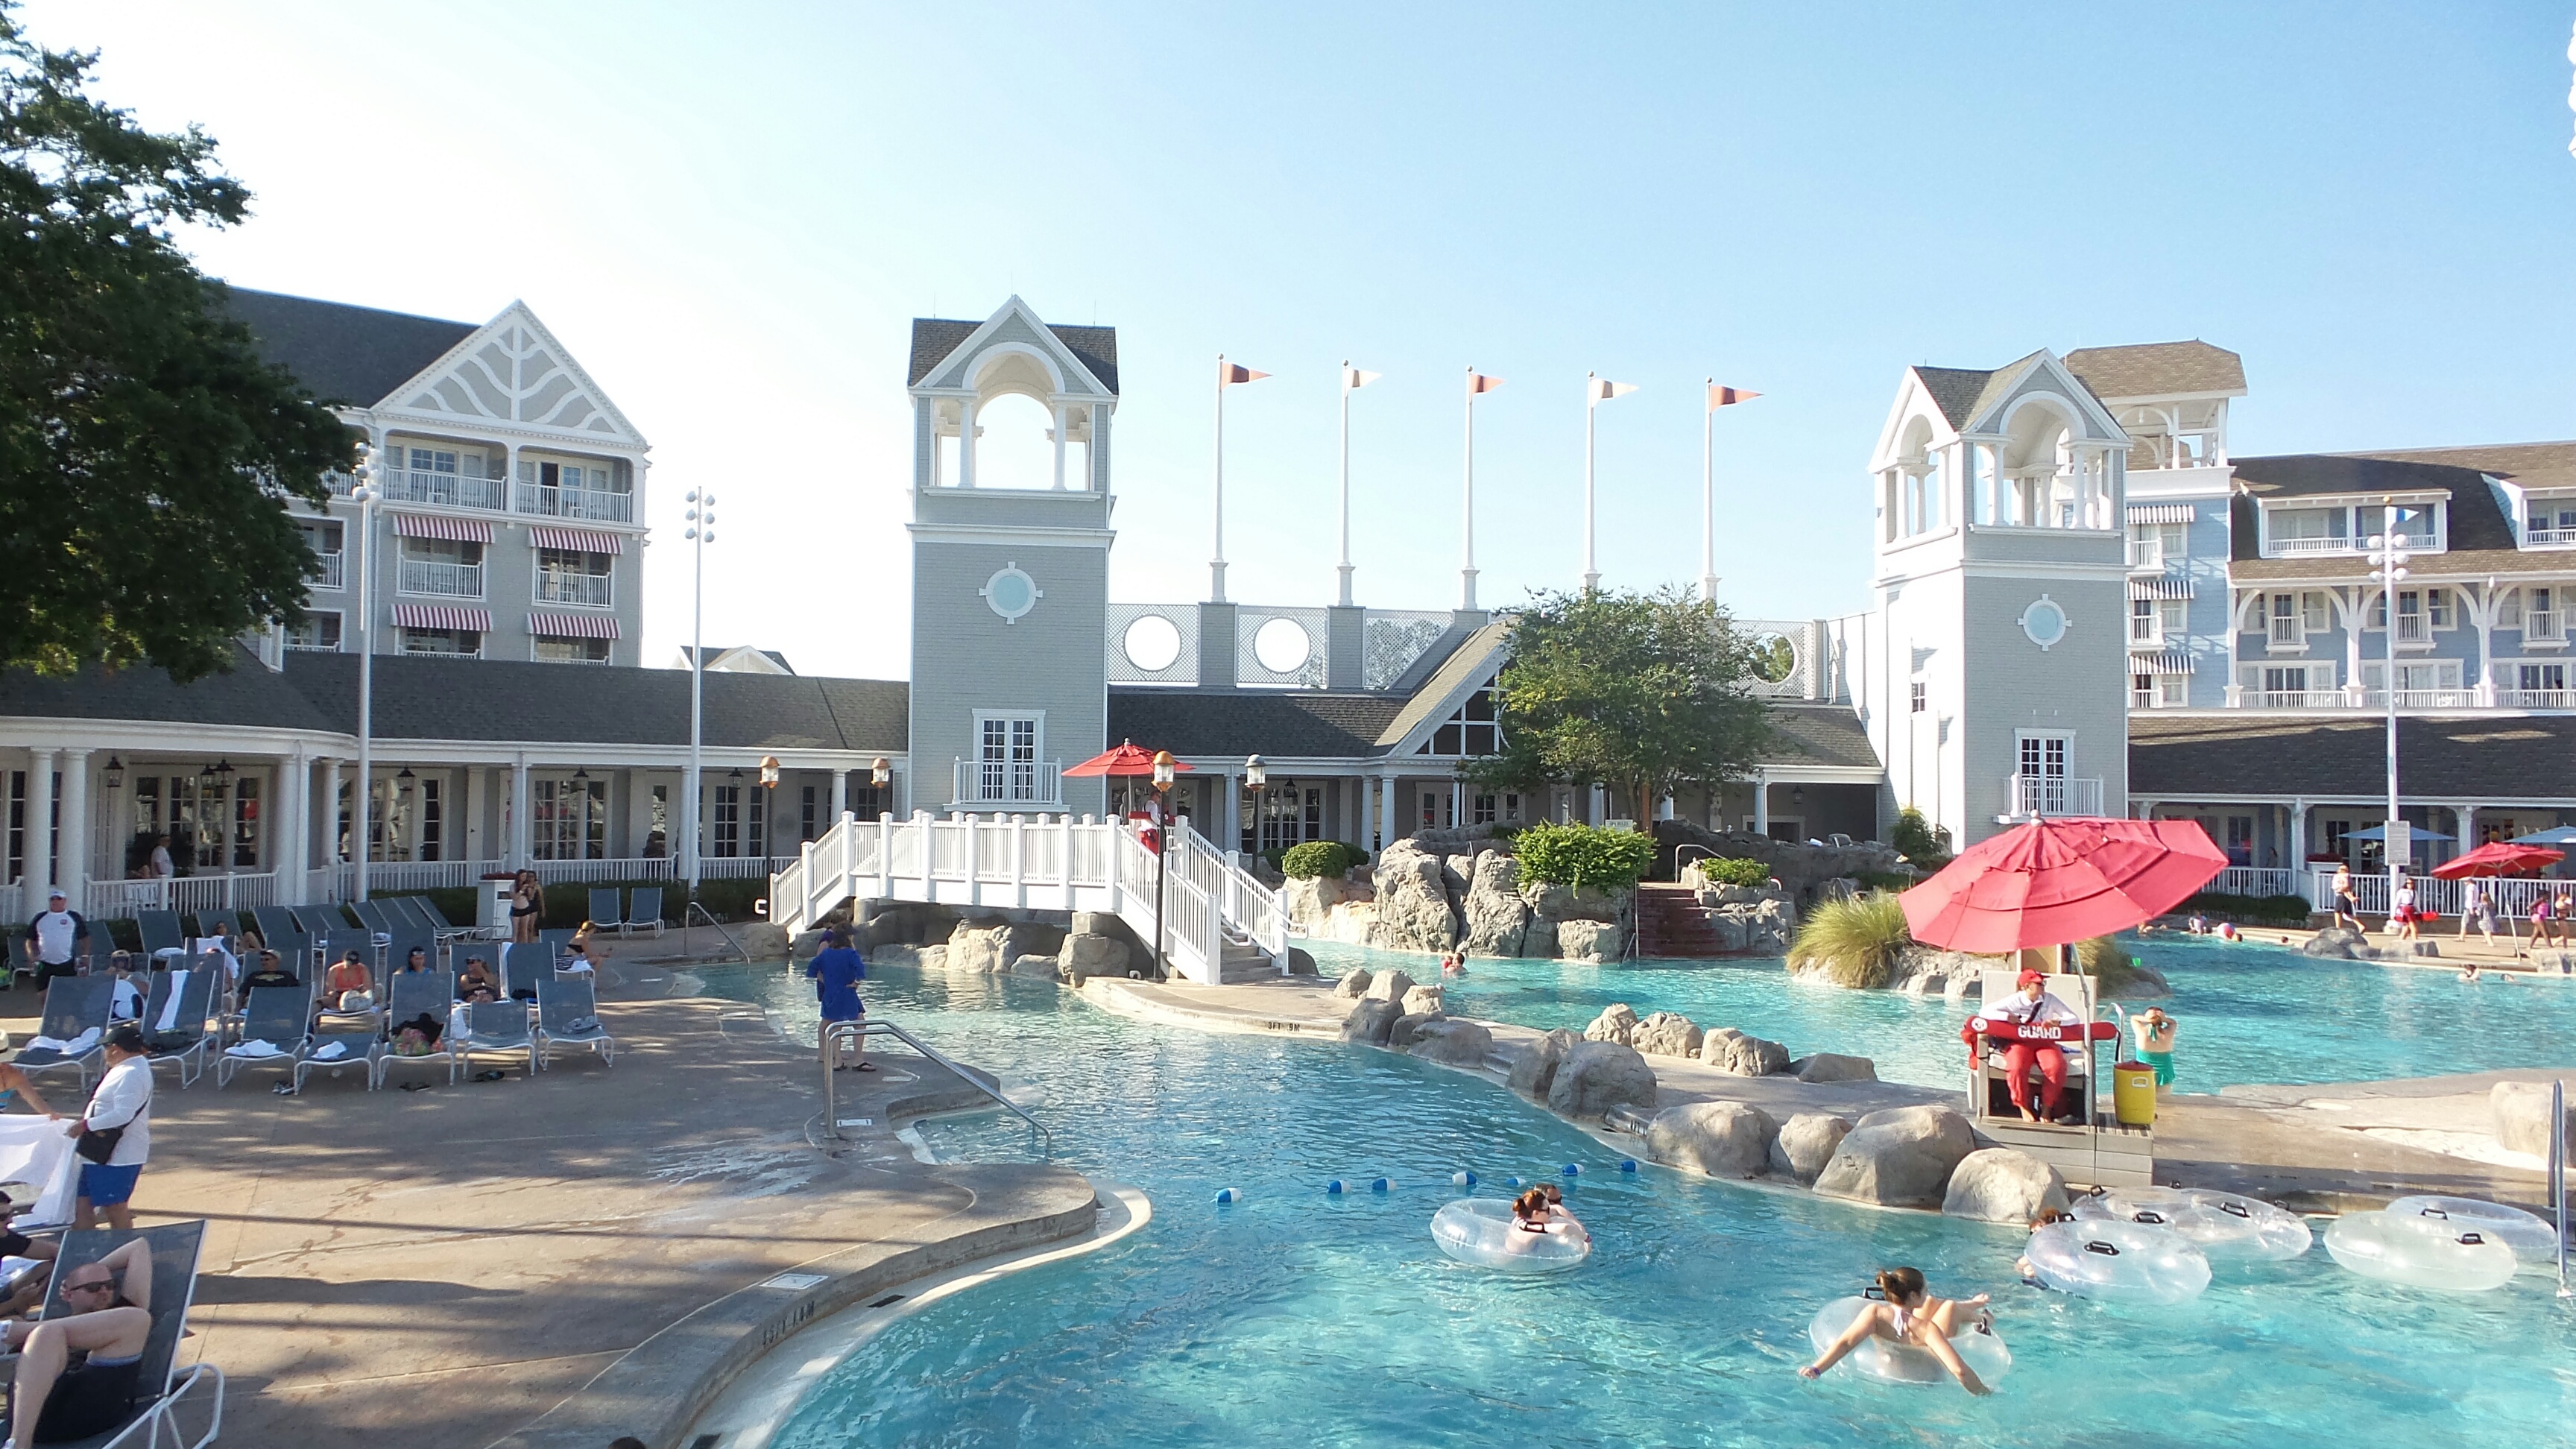 Disney’s Beach Club Resort ~ A Place To Create New Family Traditions